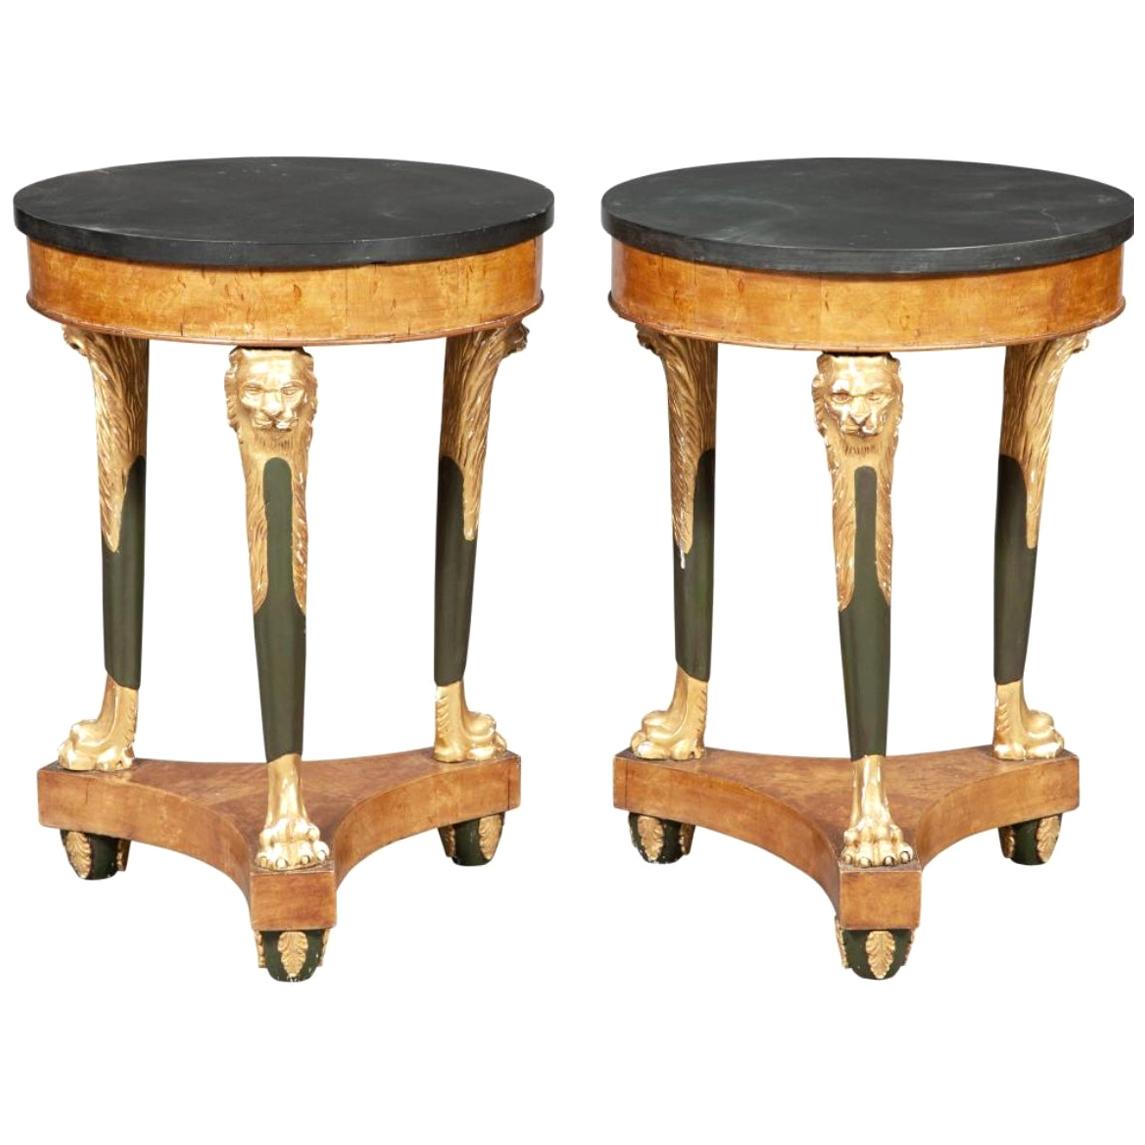 Pair of 19th Century Neoclassical Russian Karelian Birch and Slate Top Gueridons For Sale